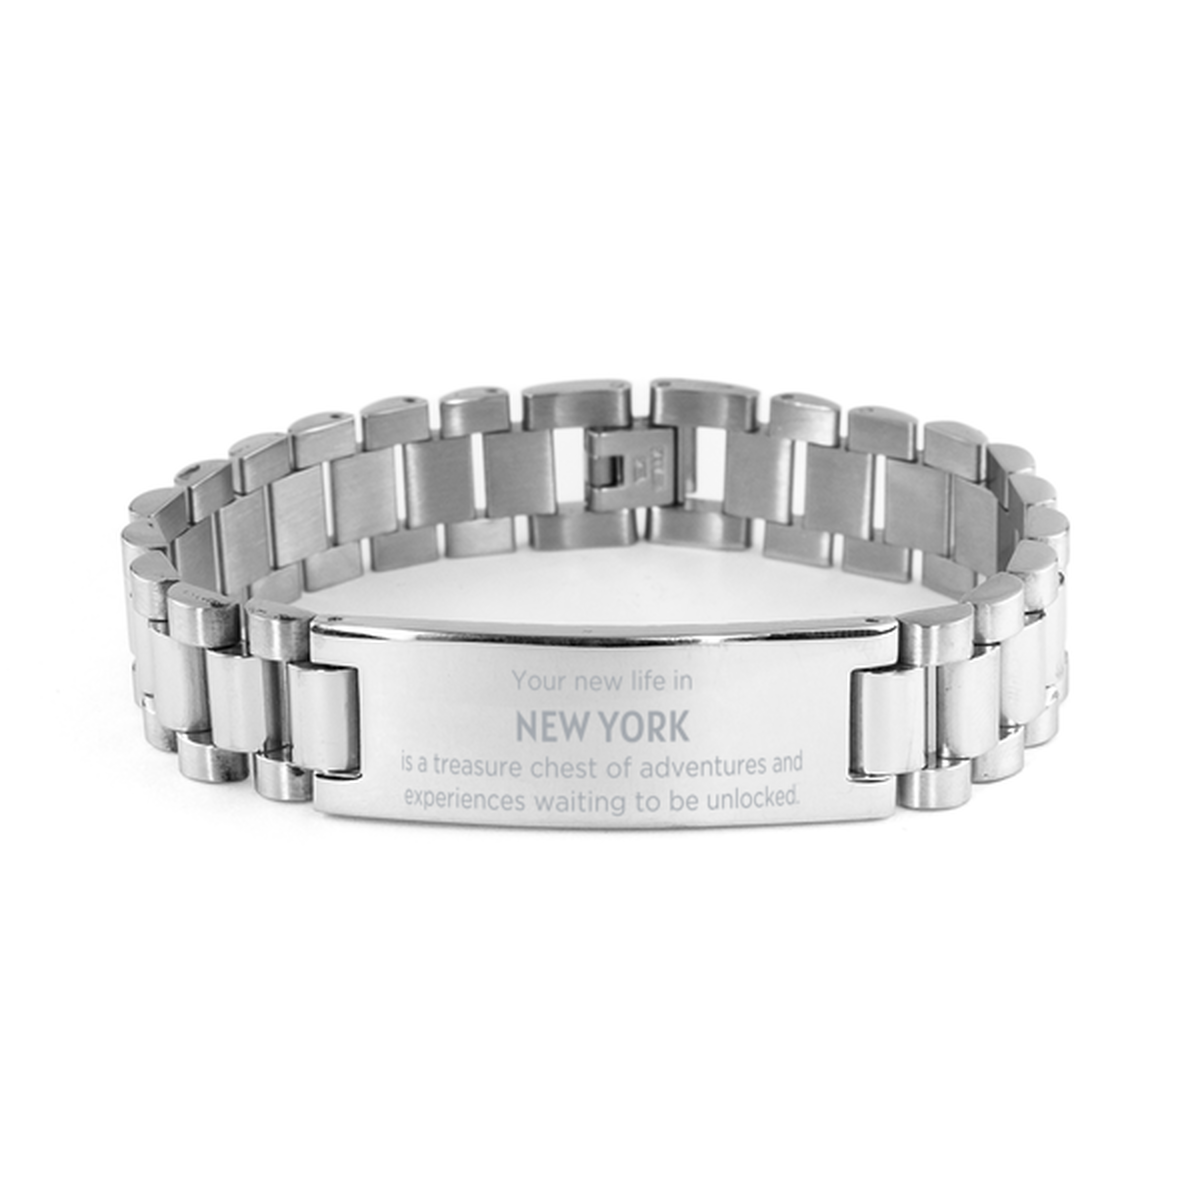 Moving to New York Gifts, Your new life in New York, Long Distance New York Christmas Ladder Stainless Steel Bracelet For Men, Women, Friends, Coworkers